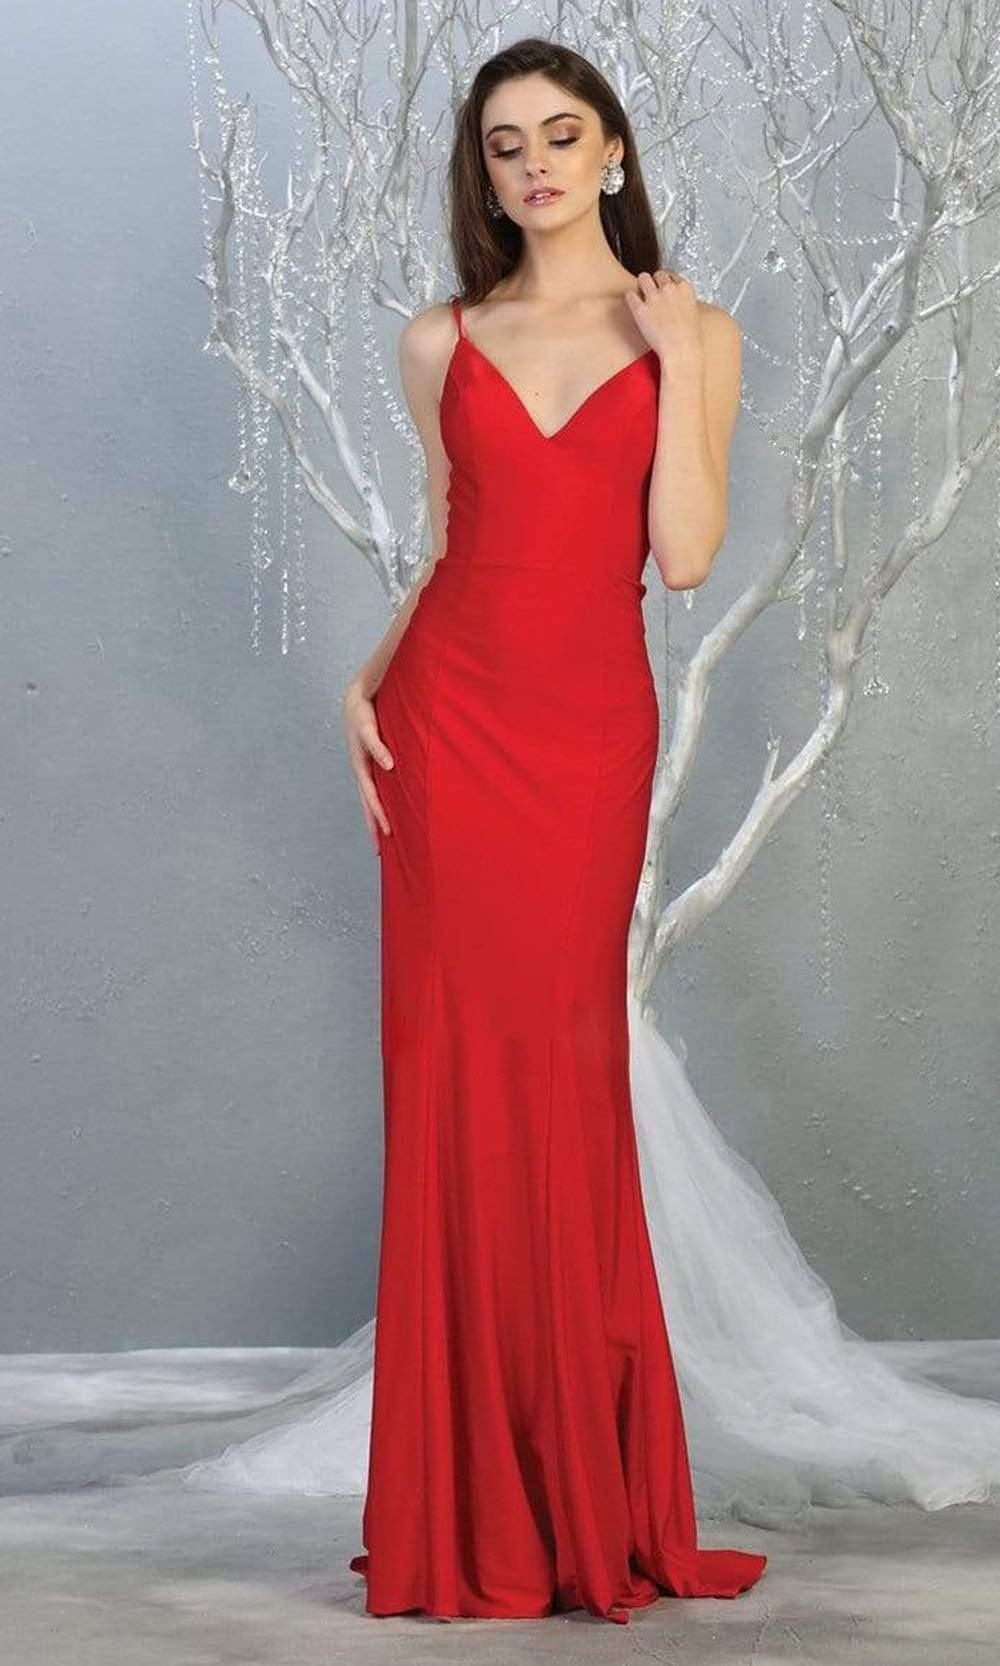 May Queen - MQ1819 Plunging V-neck Sheath Dress With Train Prom Dresses In Red